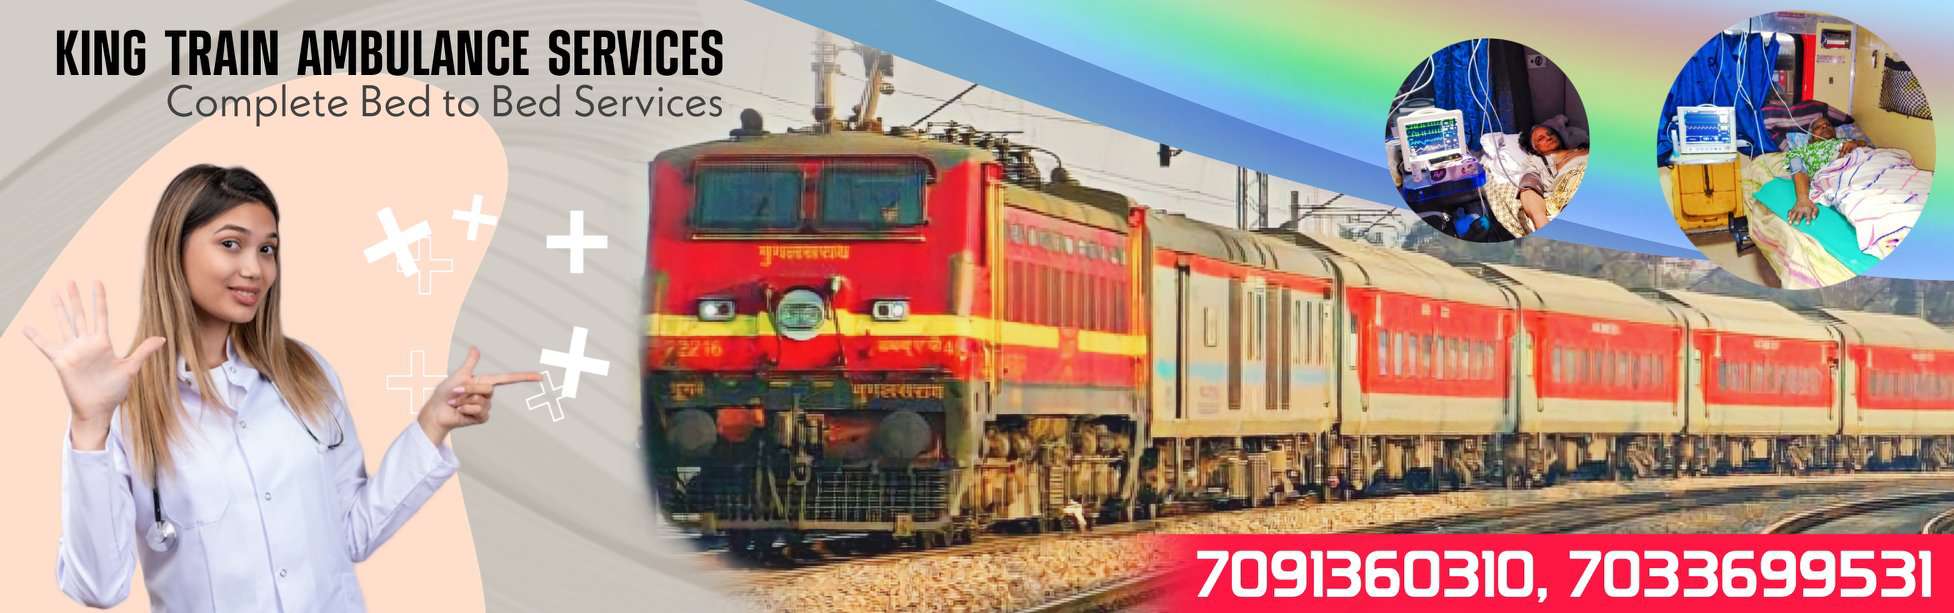 Hire Train Ambulance Services from Bhopal At Lowest Cost